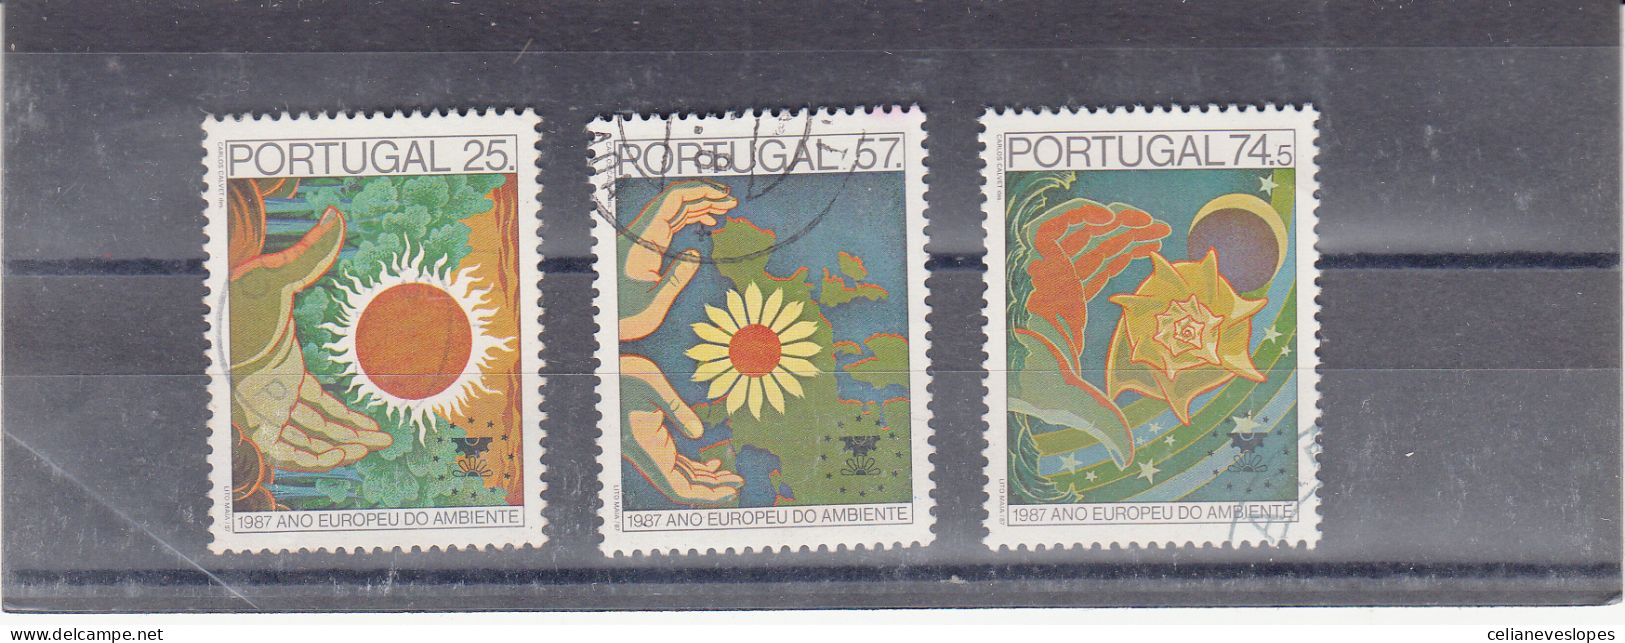 Portugal, Ano Europeu Do Ambiente, 1987, Mundifil Nº 1795 A 1797 Used - Used Stamps